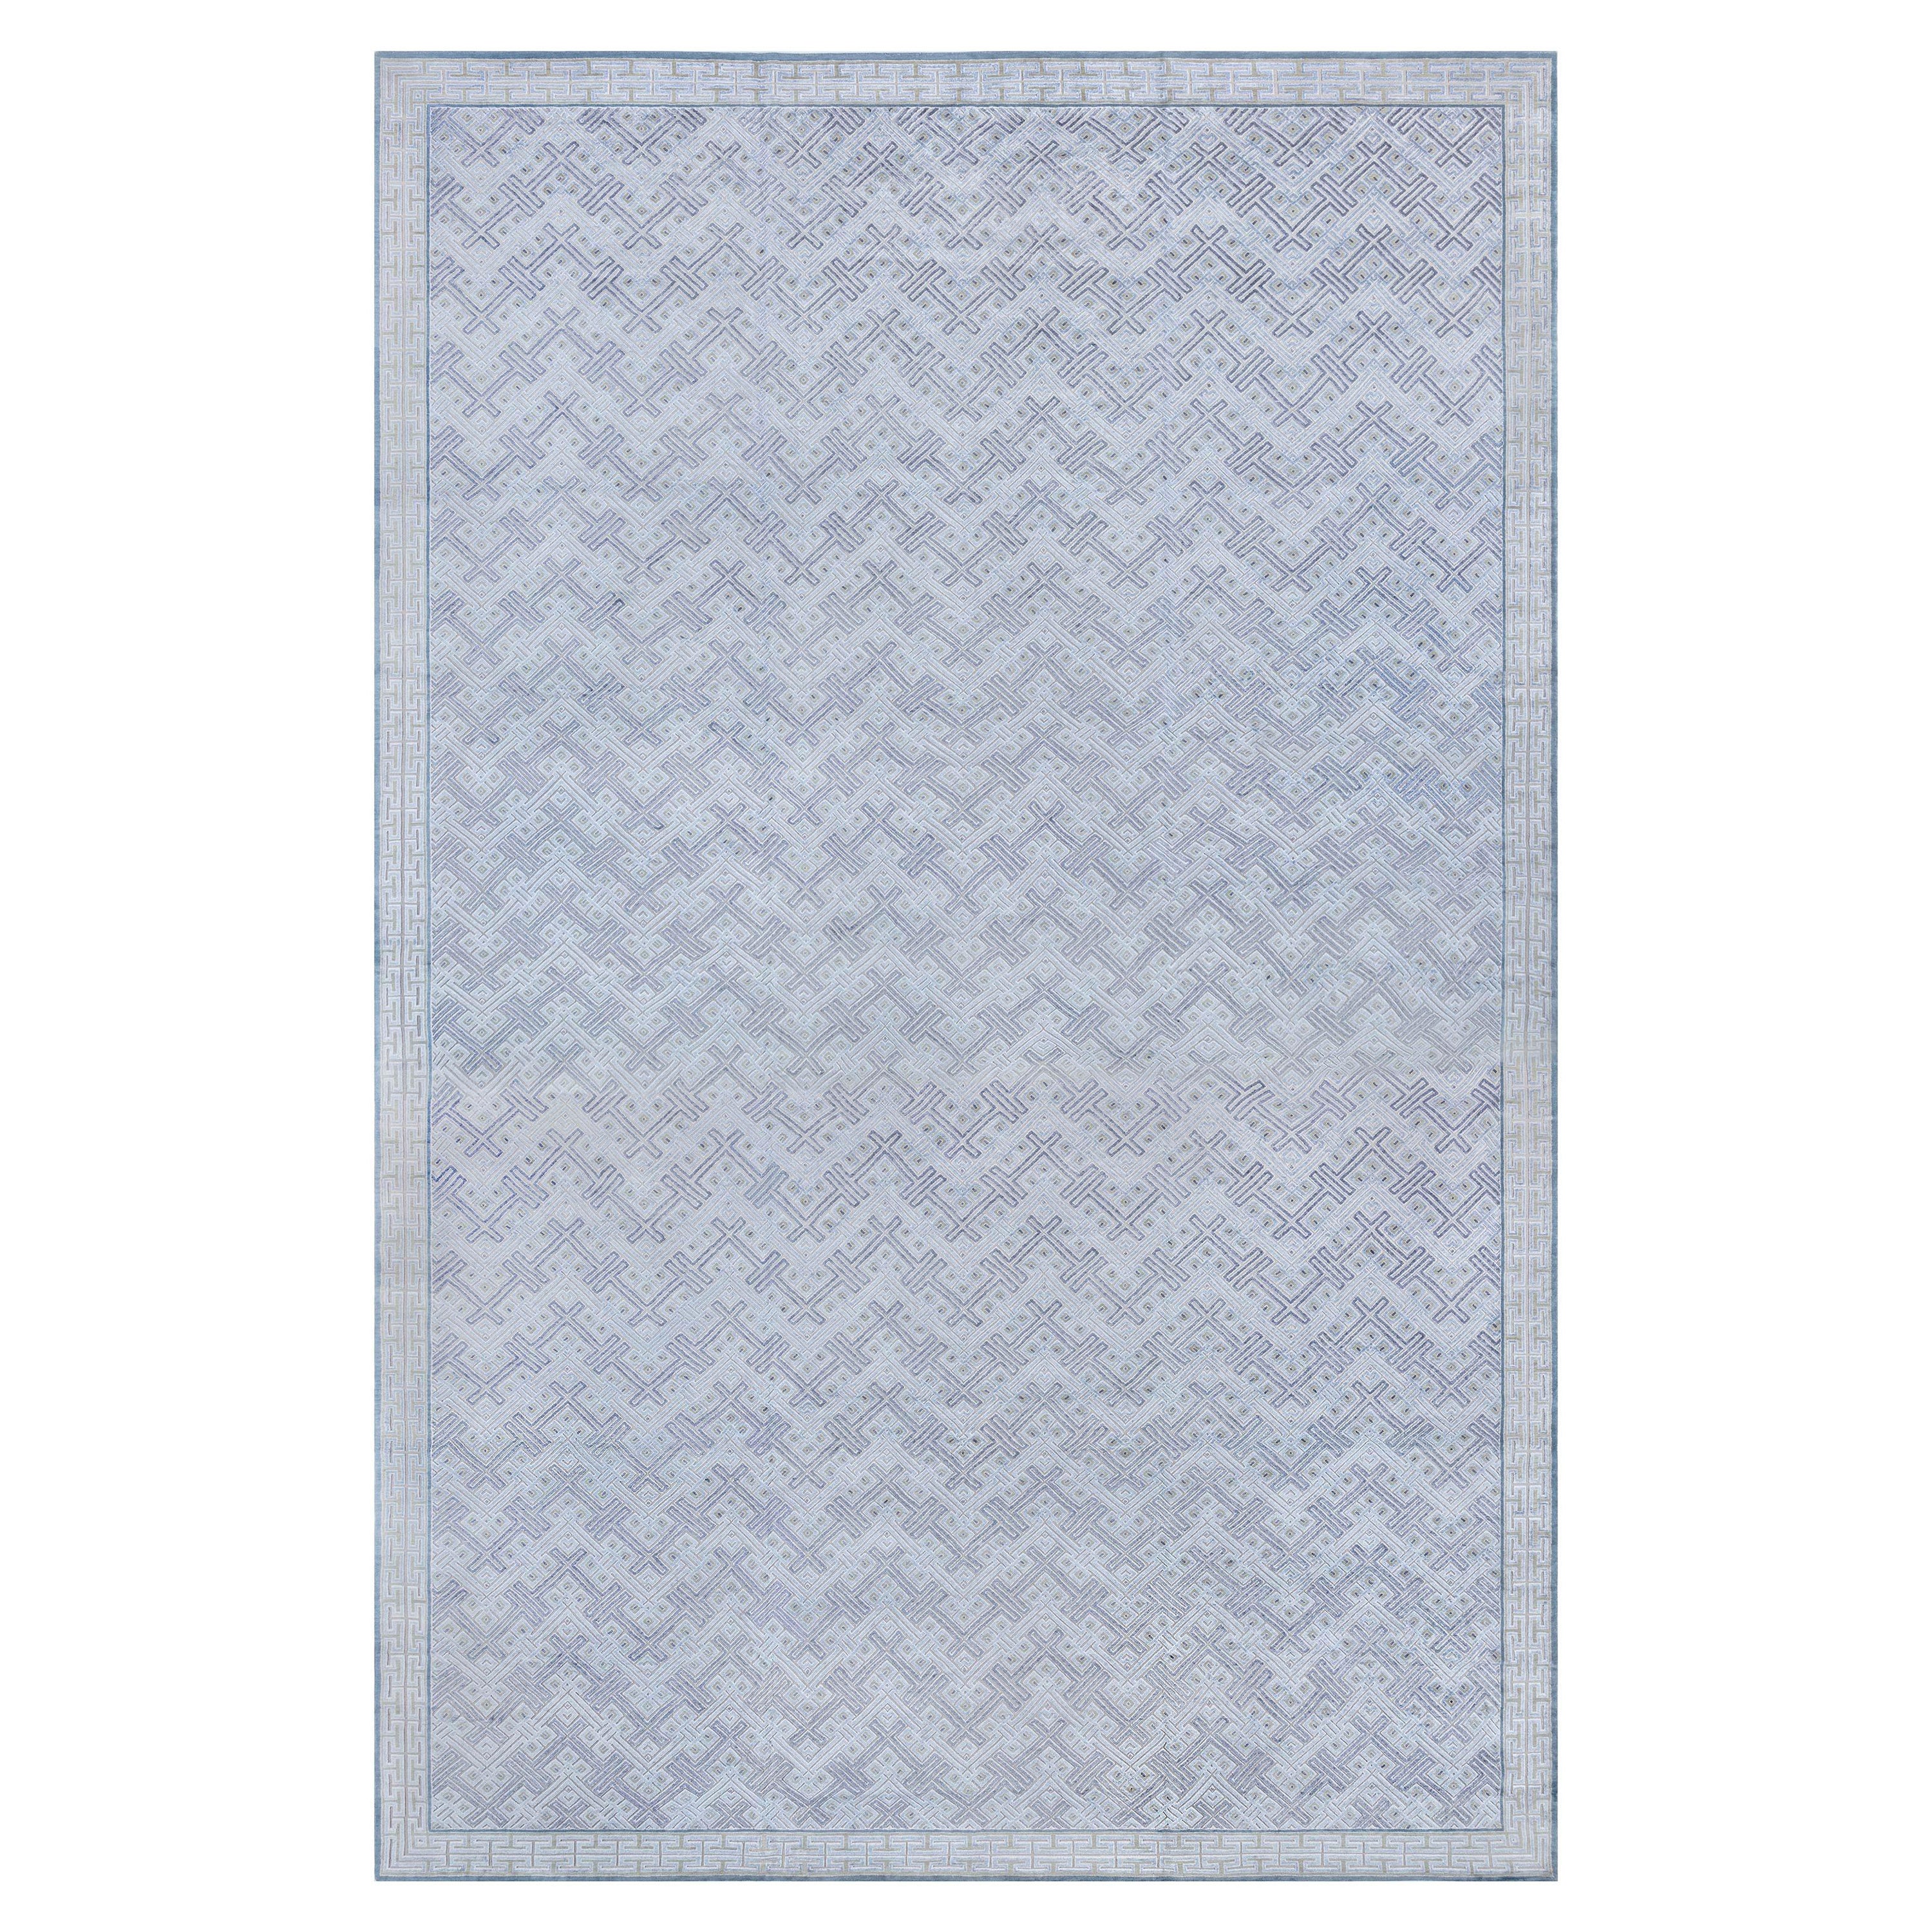 Contemporary Geometric High-Low Knotted Wool Silk Rug by Doris Leslie Blau For Sale